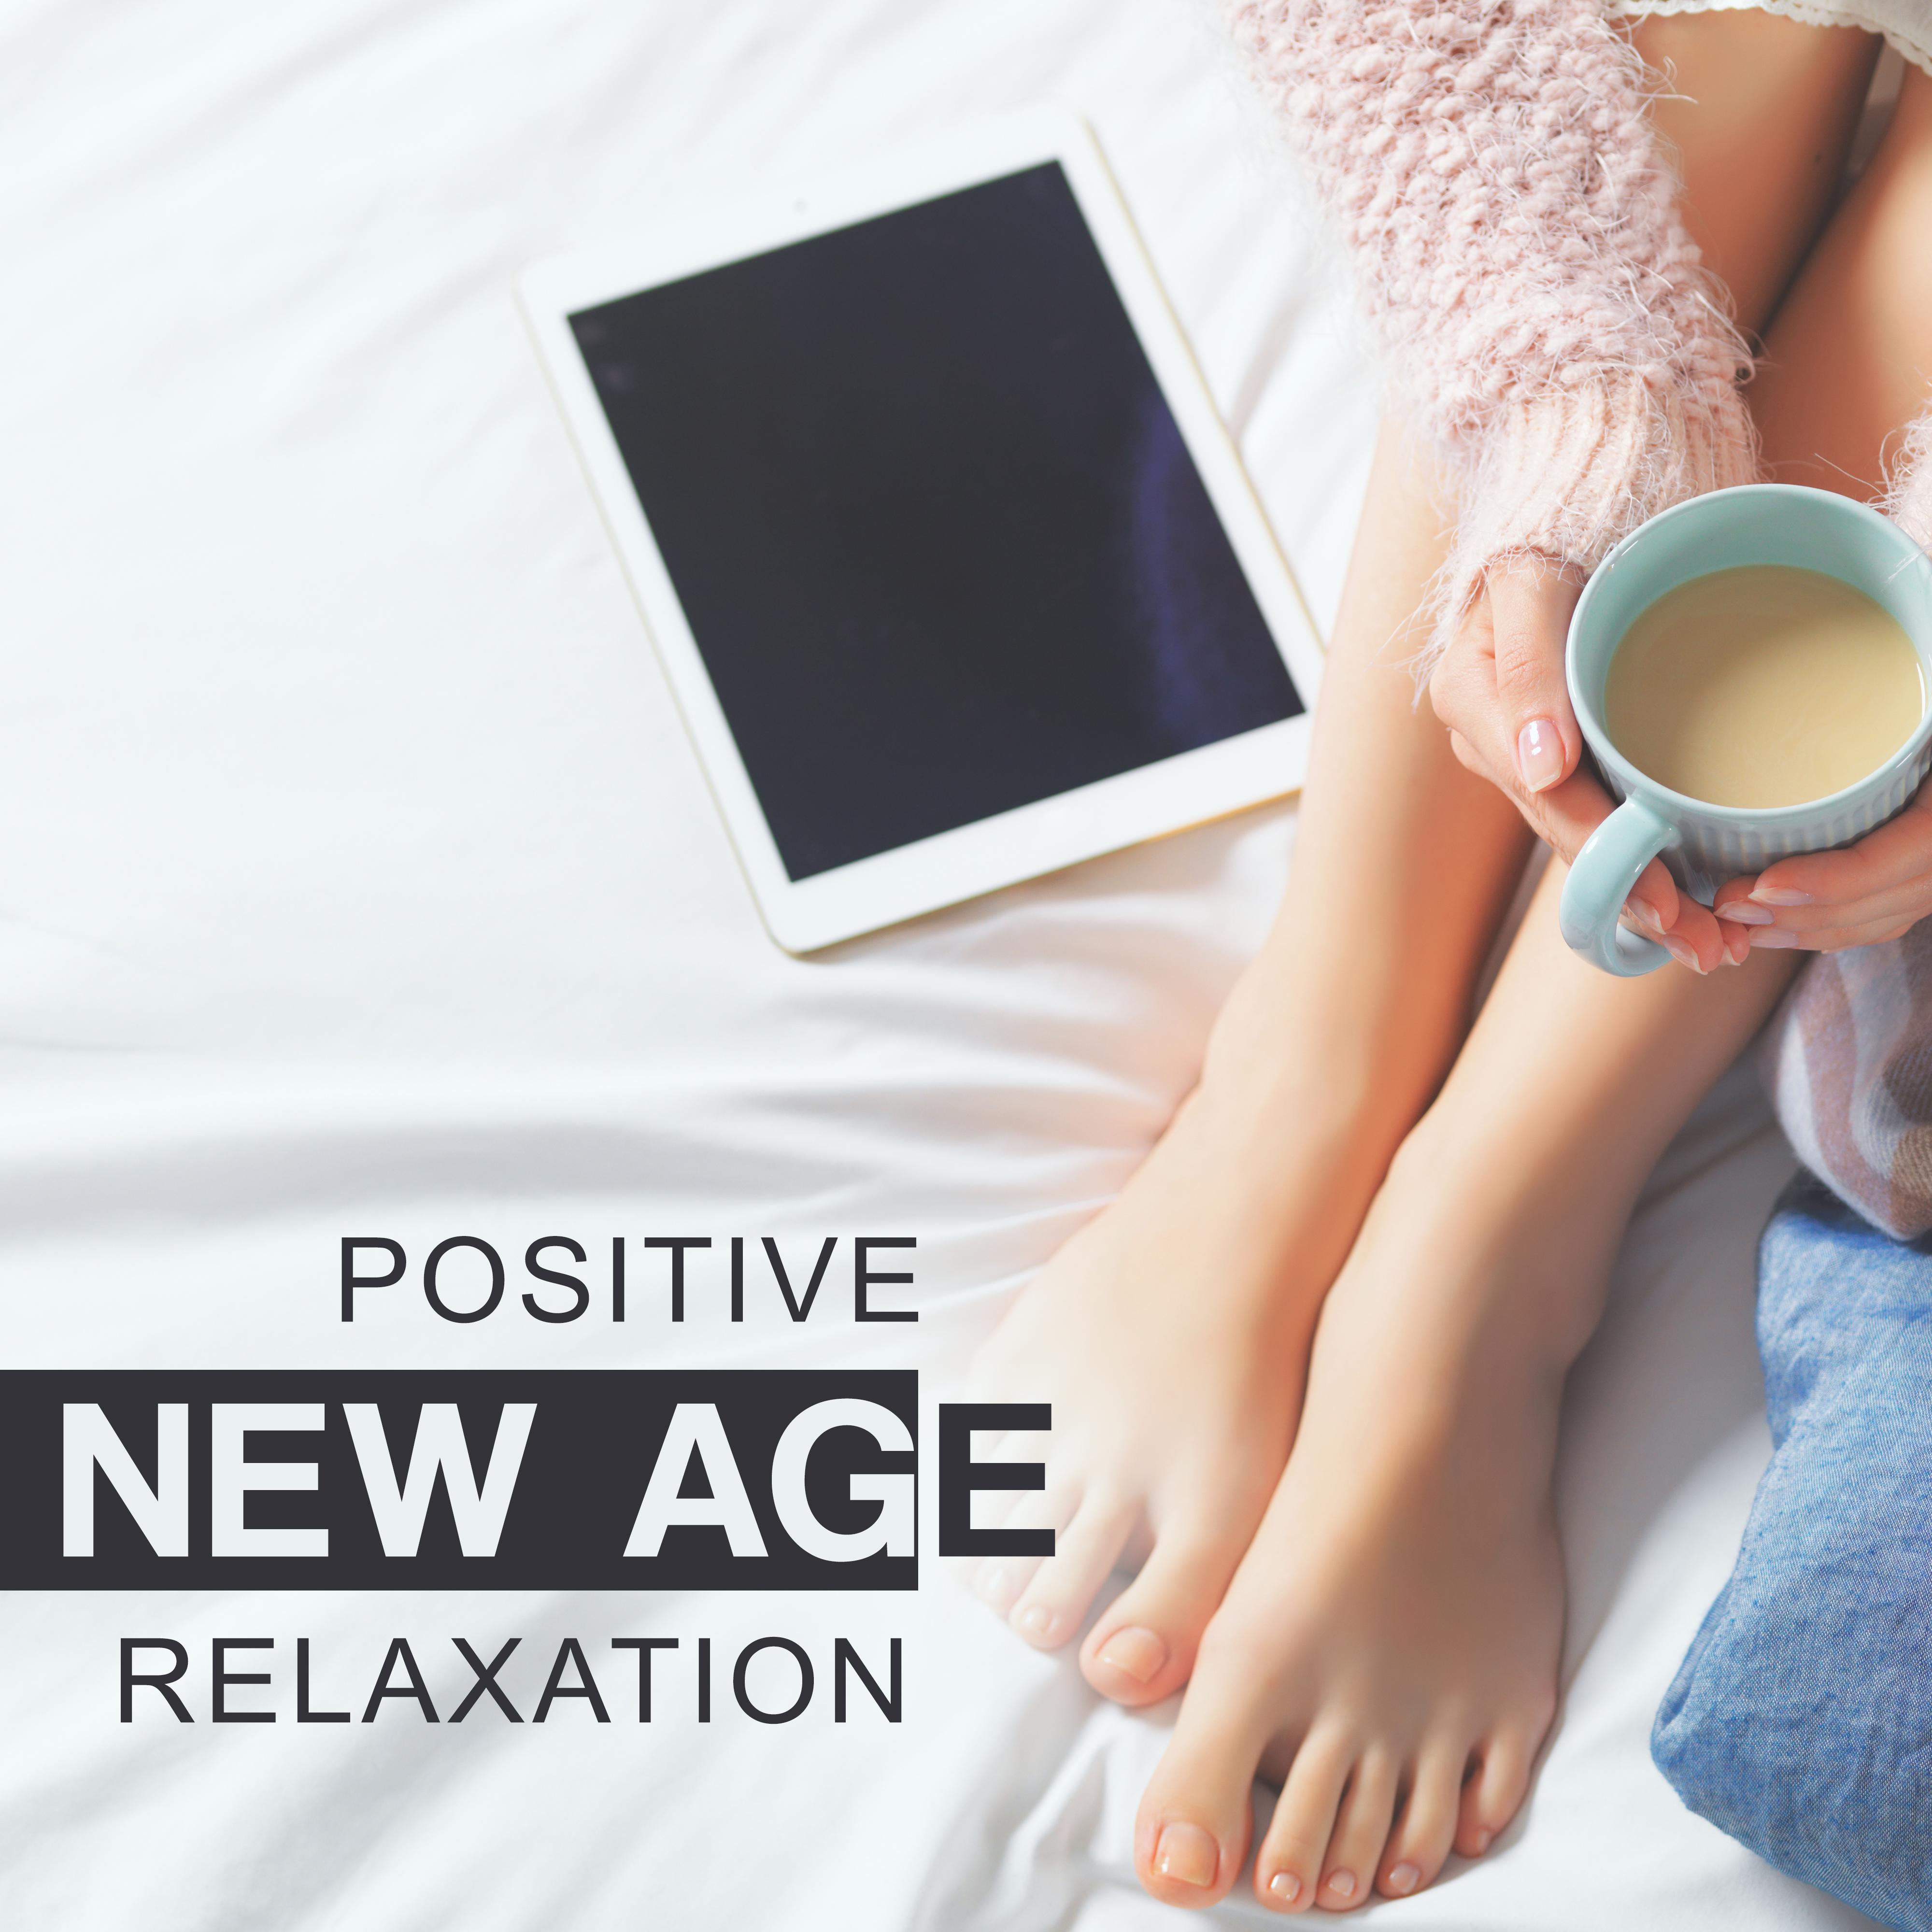 Positive New Age Relaxation